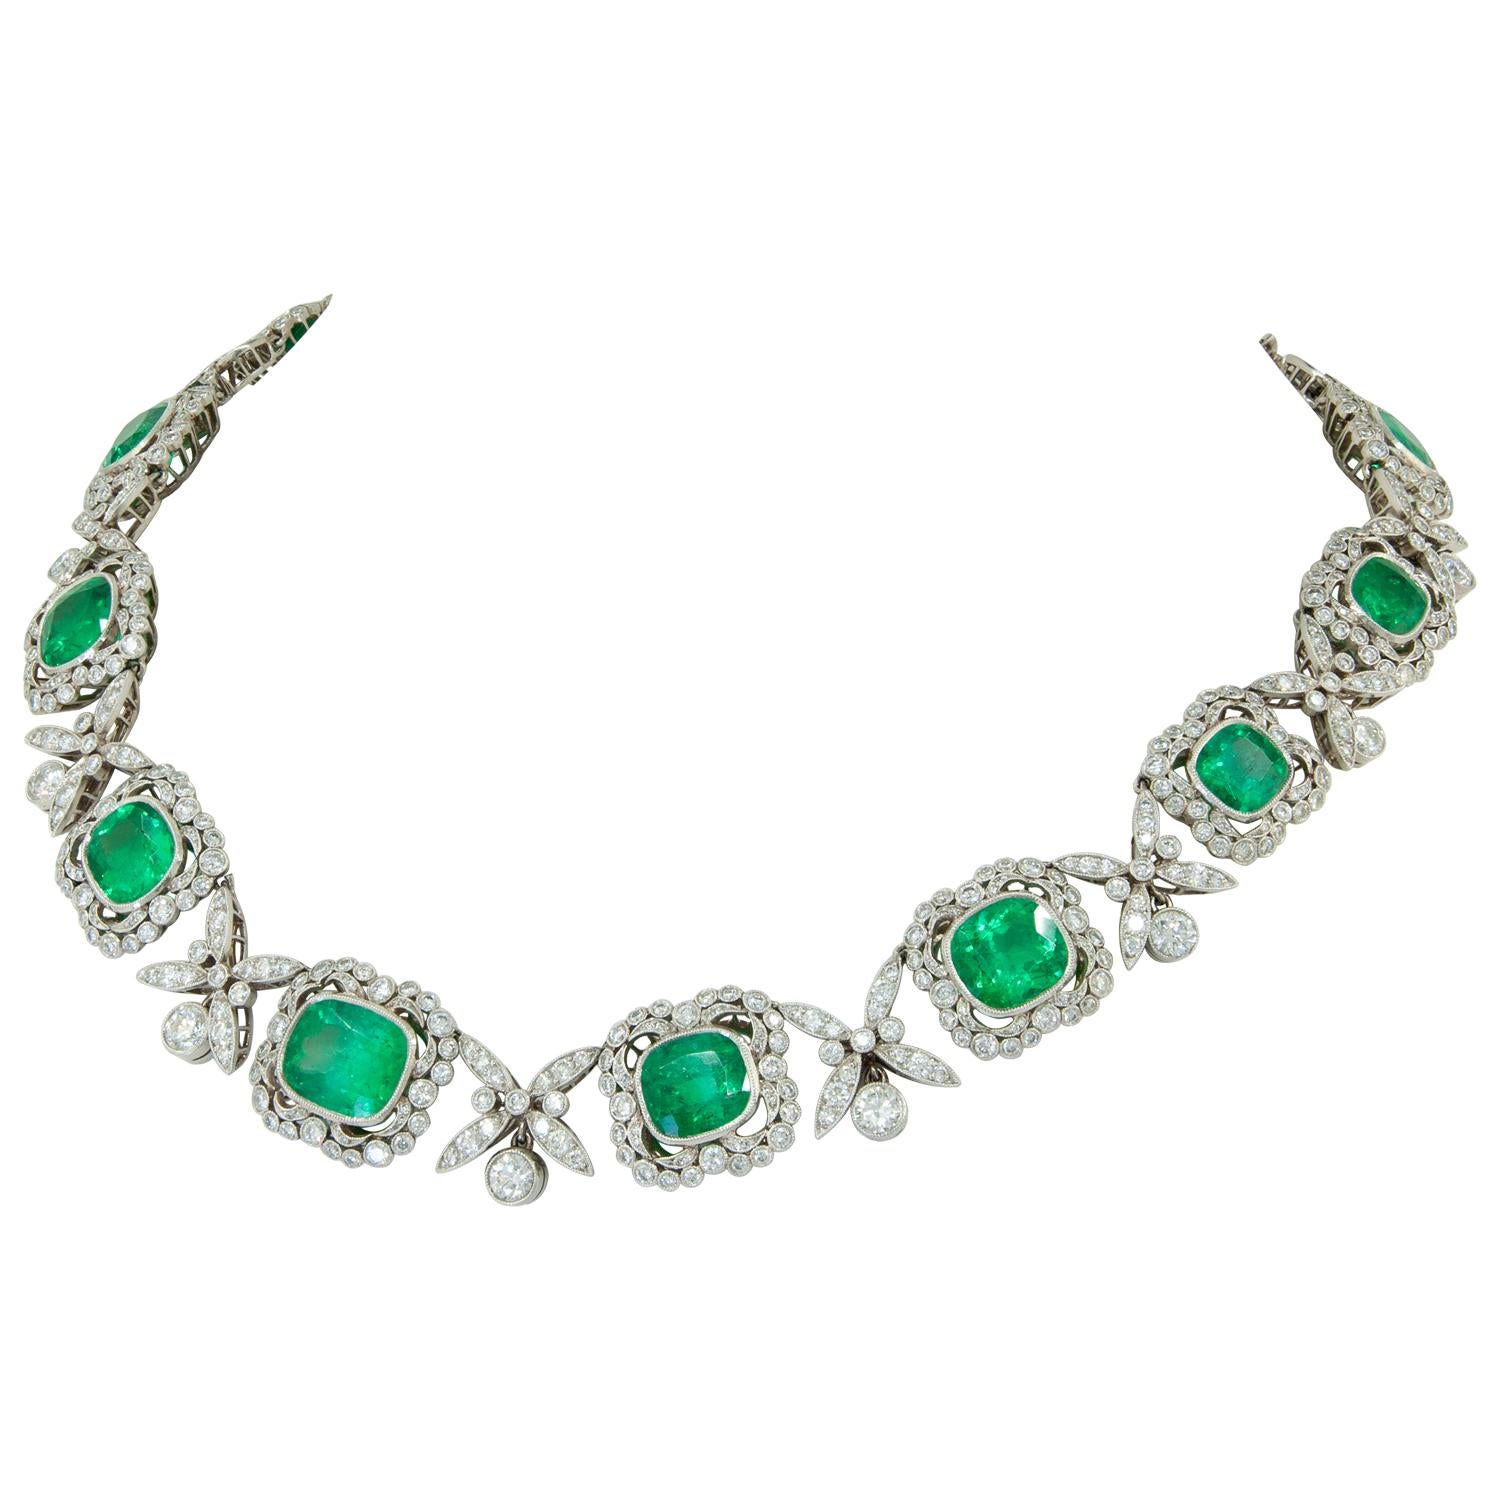 Colombian AGL Certificate Emerald Diamond Necklace
A platinum necklace, set with diamonds and cushion and square Colombian Emerald with AGL certificate.
Dimensions approx. 16 inches
Gross weight approx. 81.8 grams
Circa 1950s
